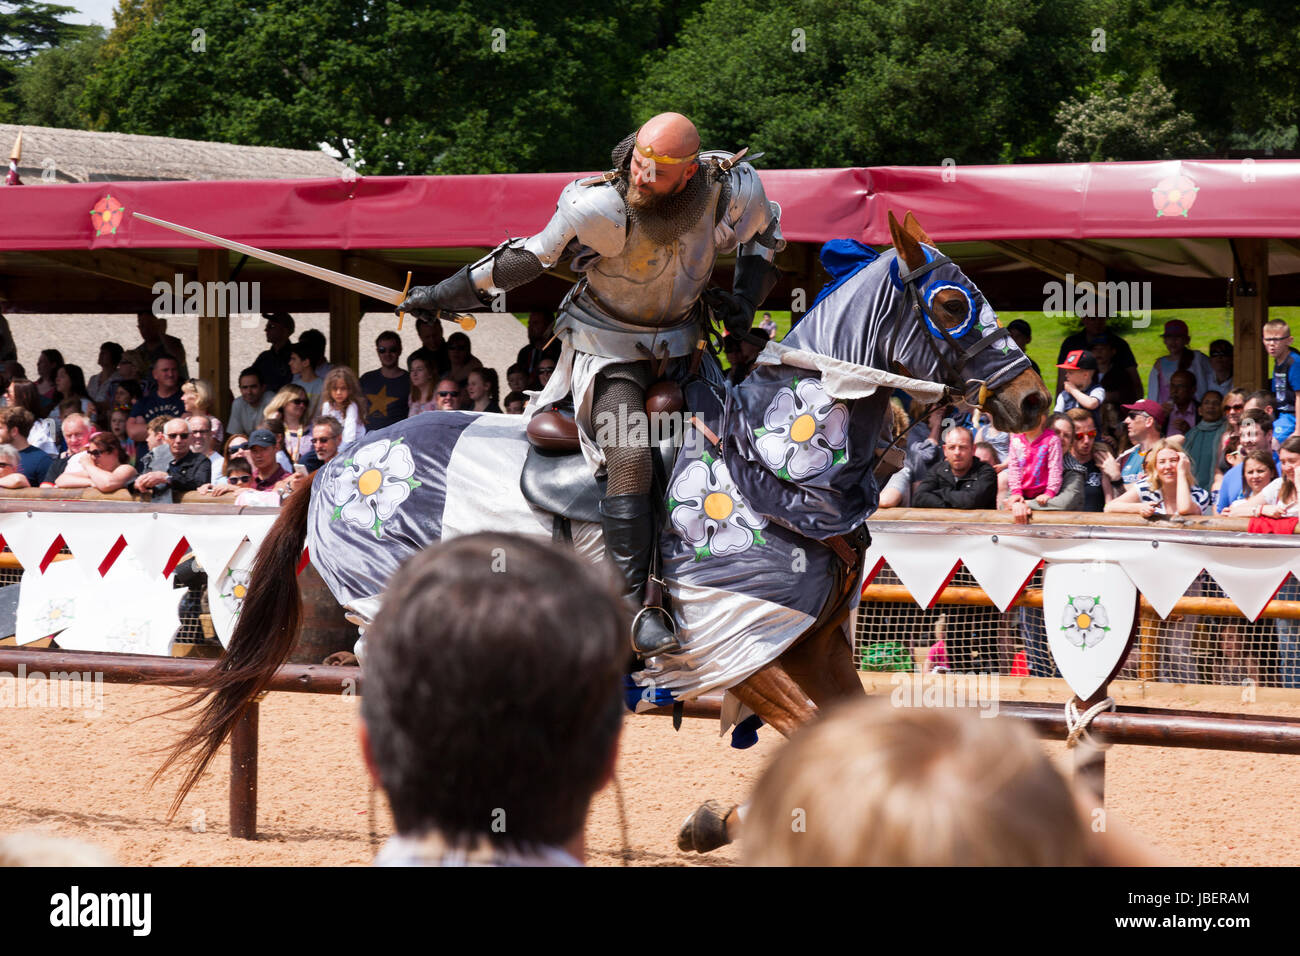 War of the Roses jousting battle re-enactment performed in front of an audience of tourists at Warwick castle in Warwickshire. UK. (88) Stock Photo